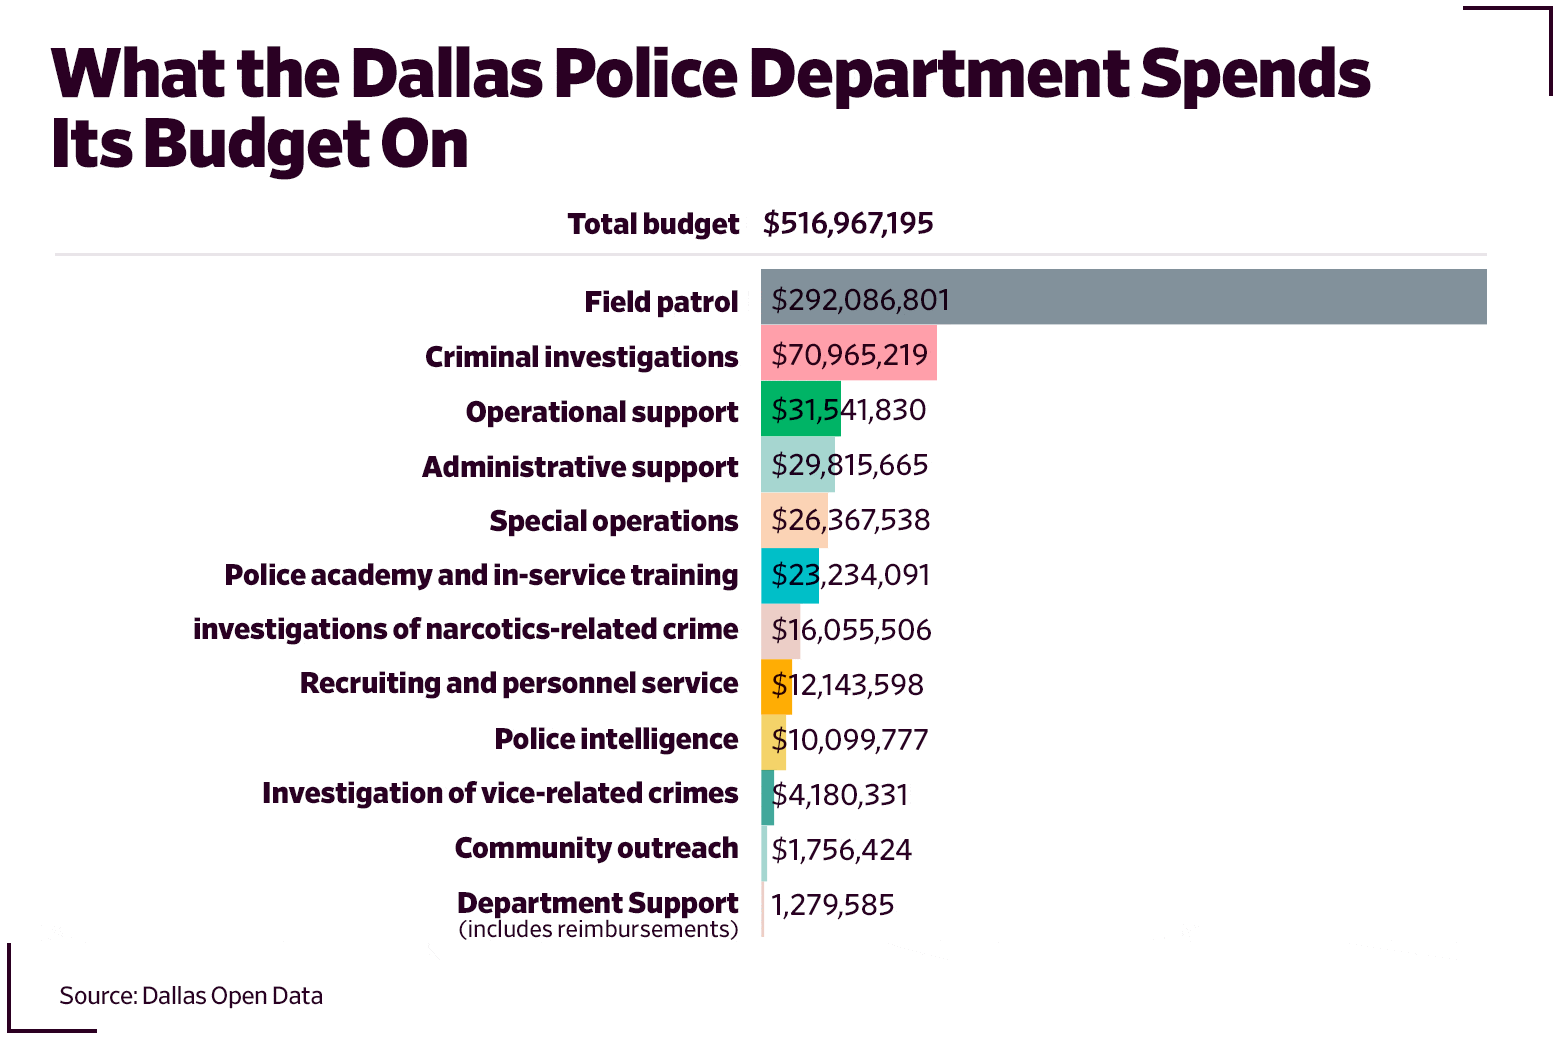 Bar graph showing what the Dallas Police Department spends its budget on